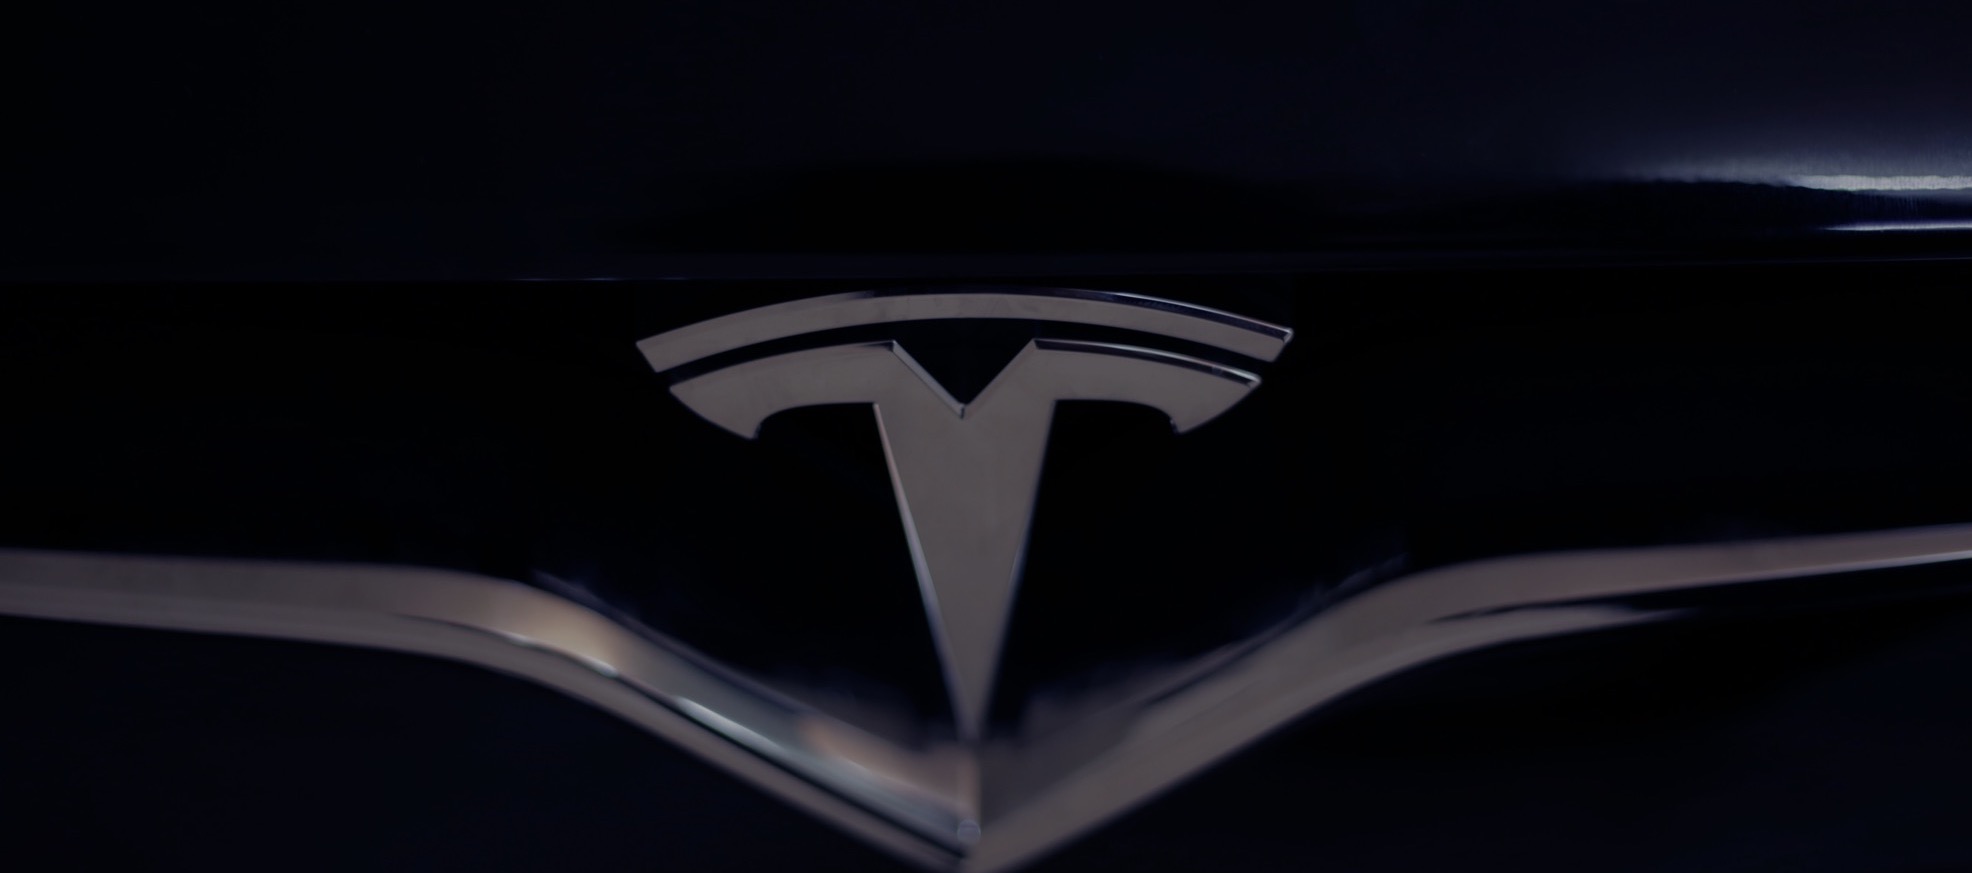 Tesla inching into S&P 500 and other news